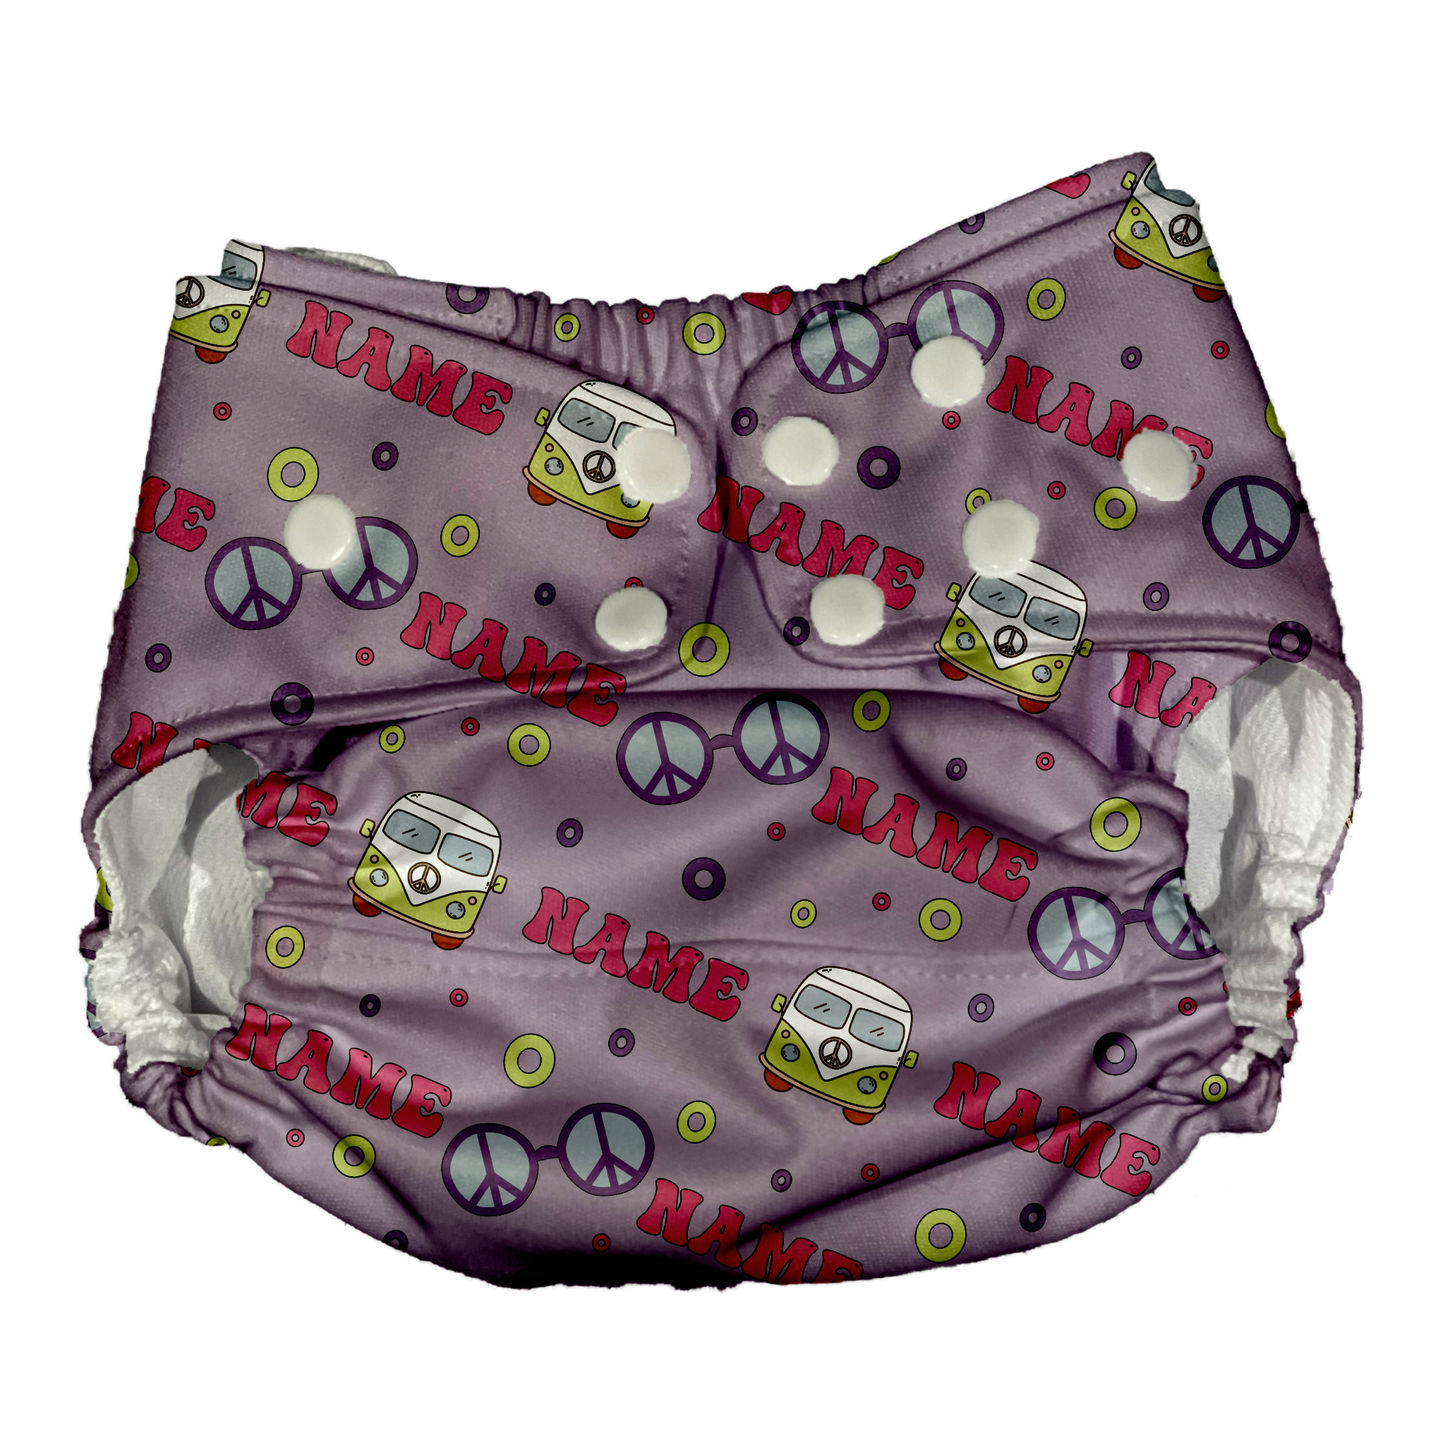 Groovy Spring Themed Waterproof Diaper Cover | Reusable Swimmer